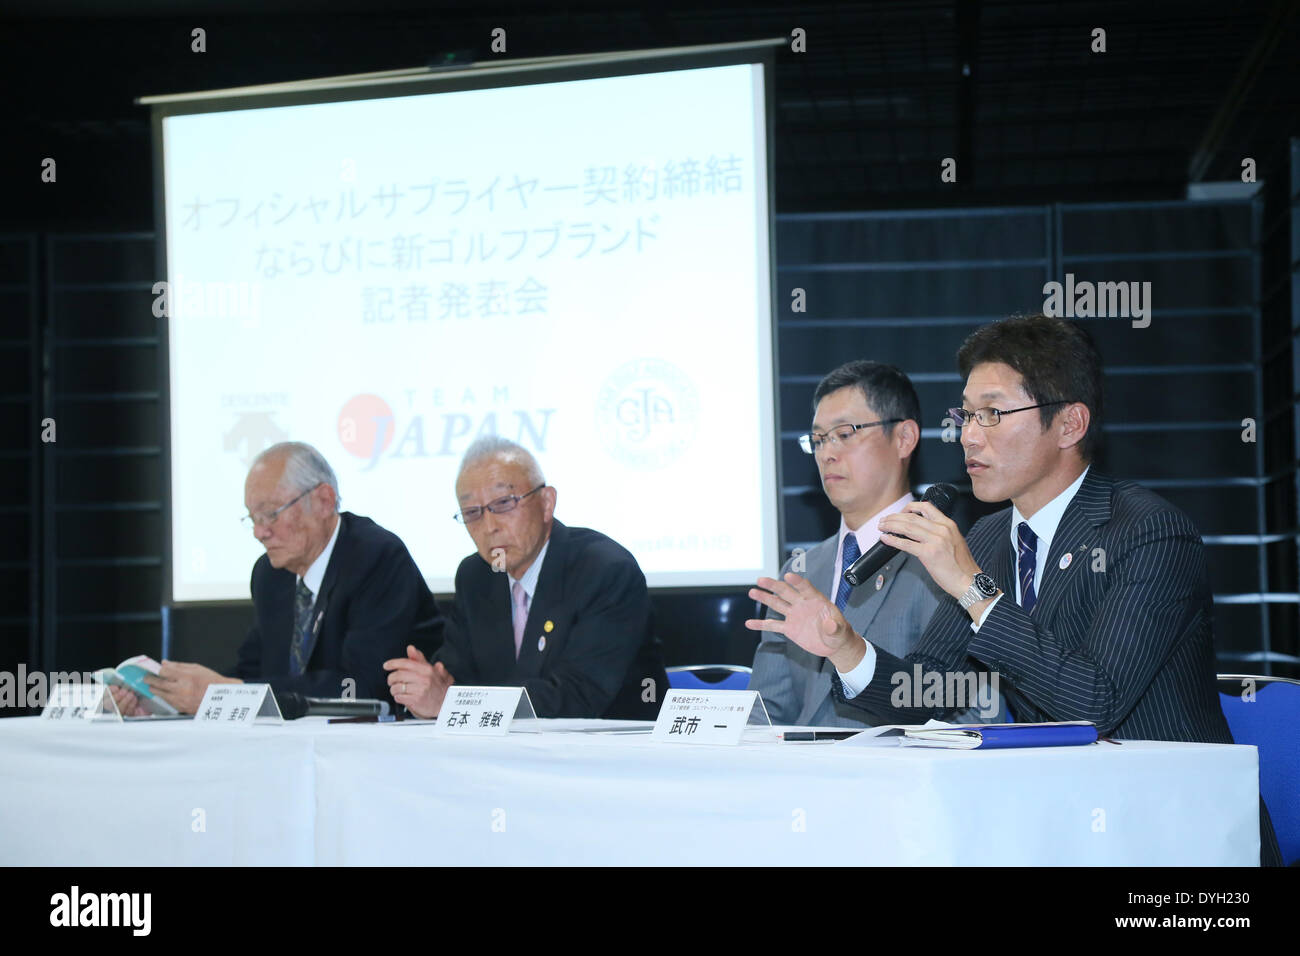 (L-R) Takayuki Anzai, Keiji Nagata, Masatoshi Ishimoto, Hajime Takechi, APRIL 17, 2014 : A press conference about Japanese sports brand DESCENTE at Tokyo, Japan. DESCENTE made an official supplier agreement with Japan Golf Association (JGA) and started their new brand 'DESCENTE GOLF'. Credit:  Yohei Osada/AFLO SPORT/Alamy Live News Stock Photo